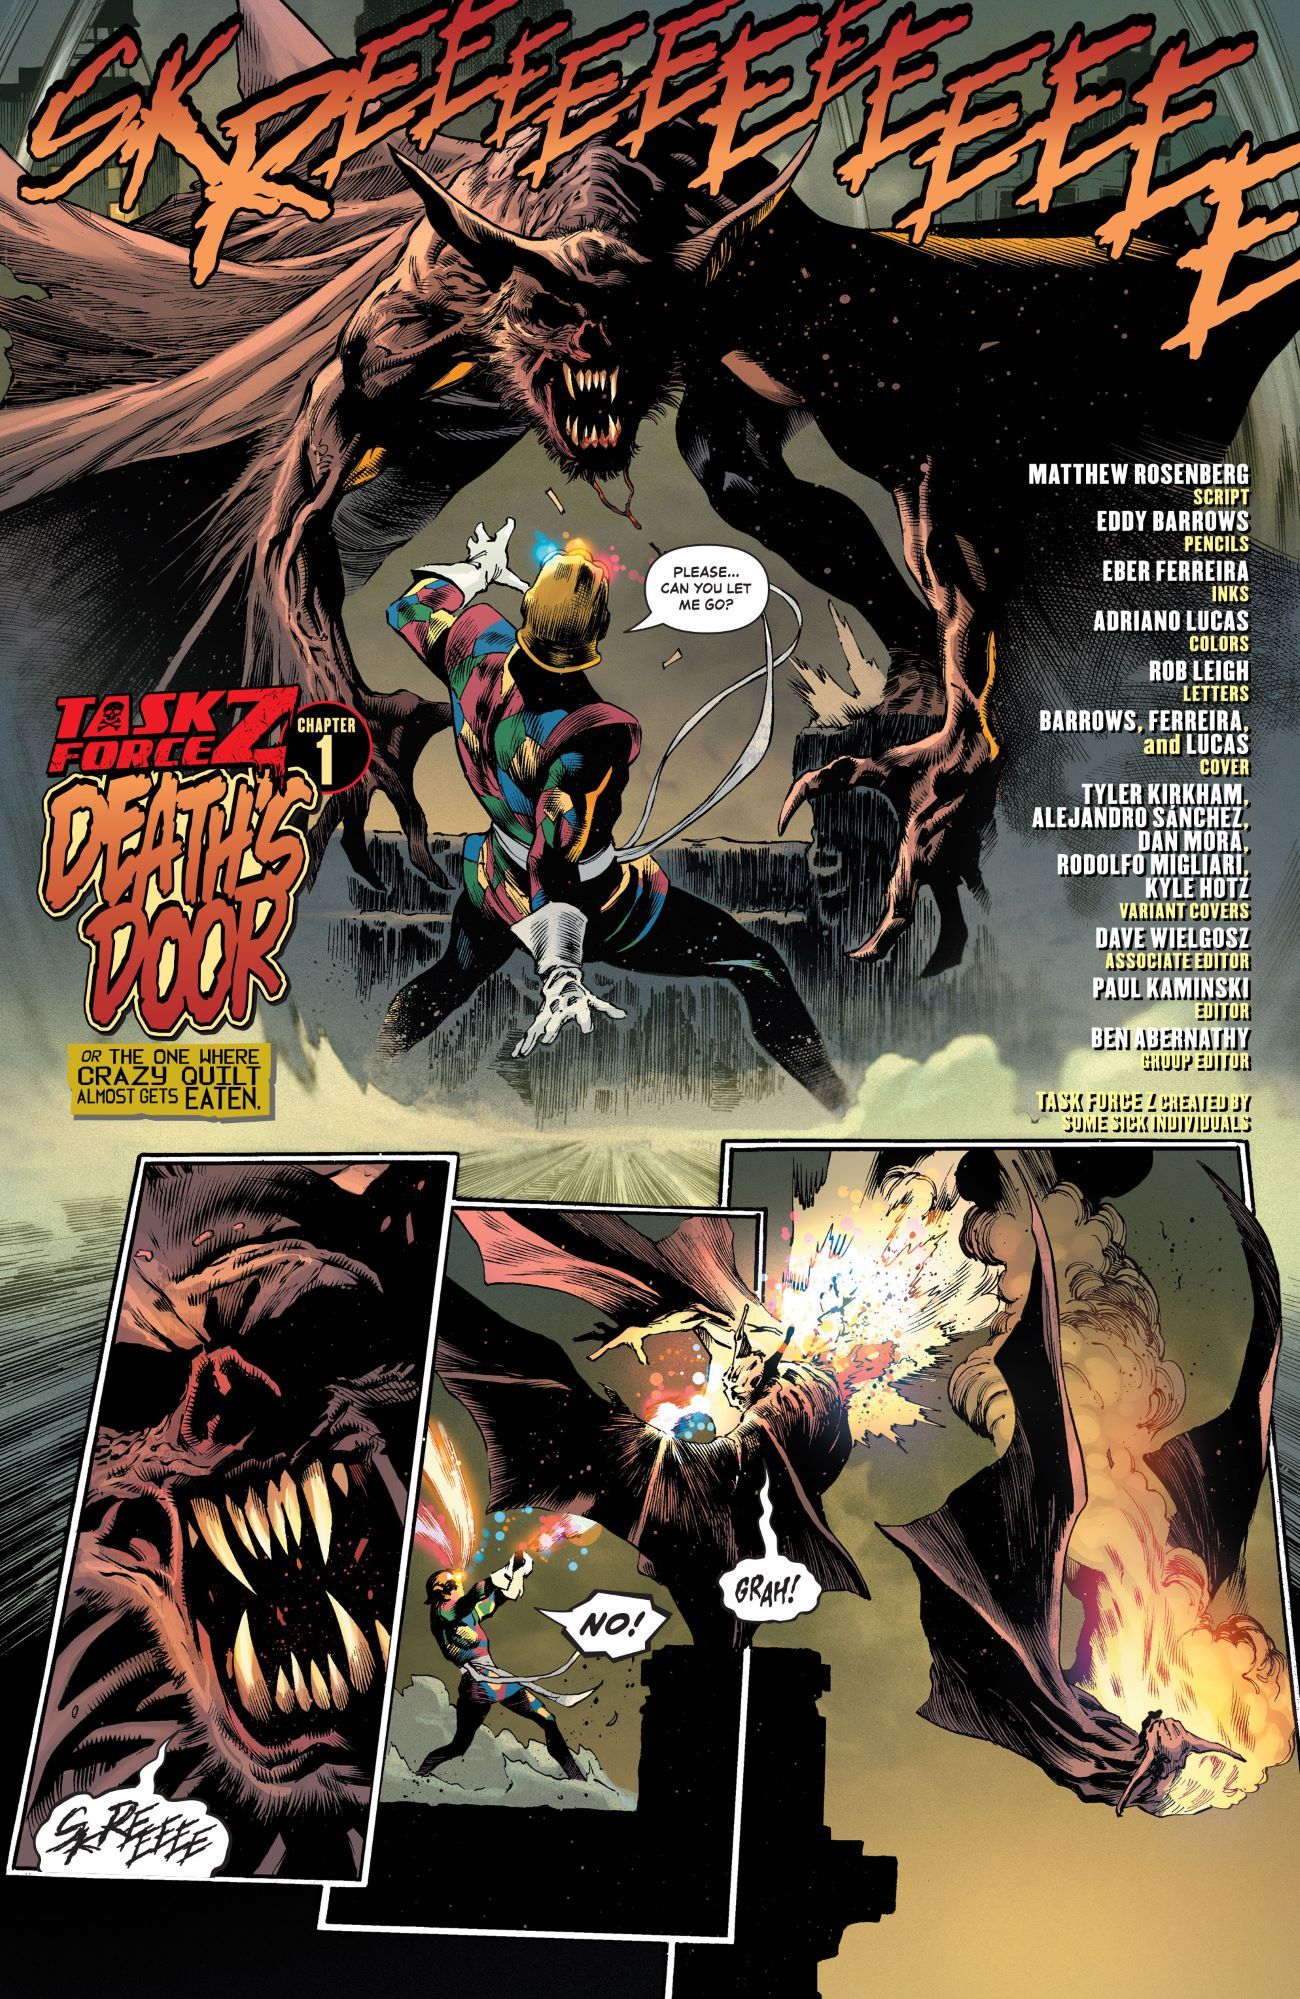 TASK FORCE Z Jason Todd Brings A Zombie Team to DCs Main Continuity